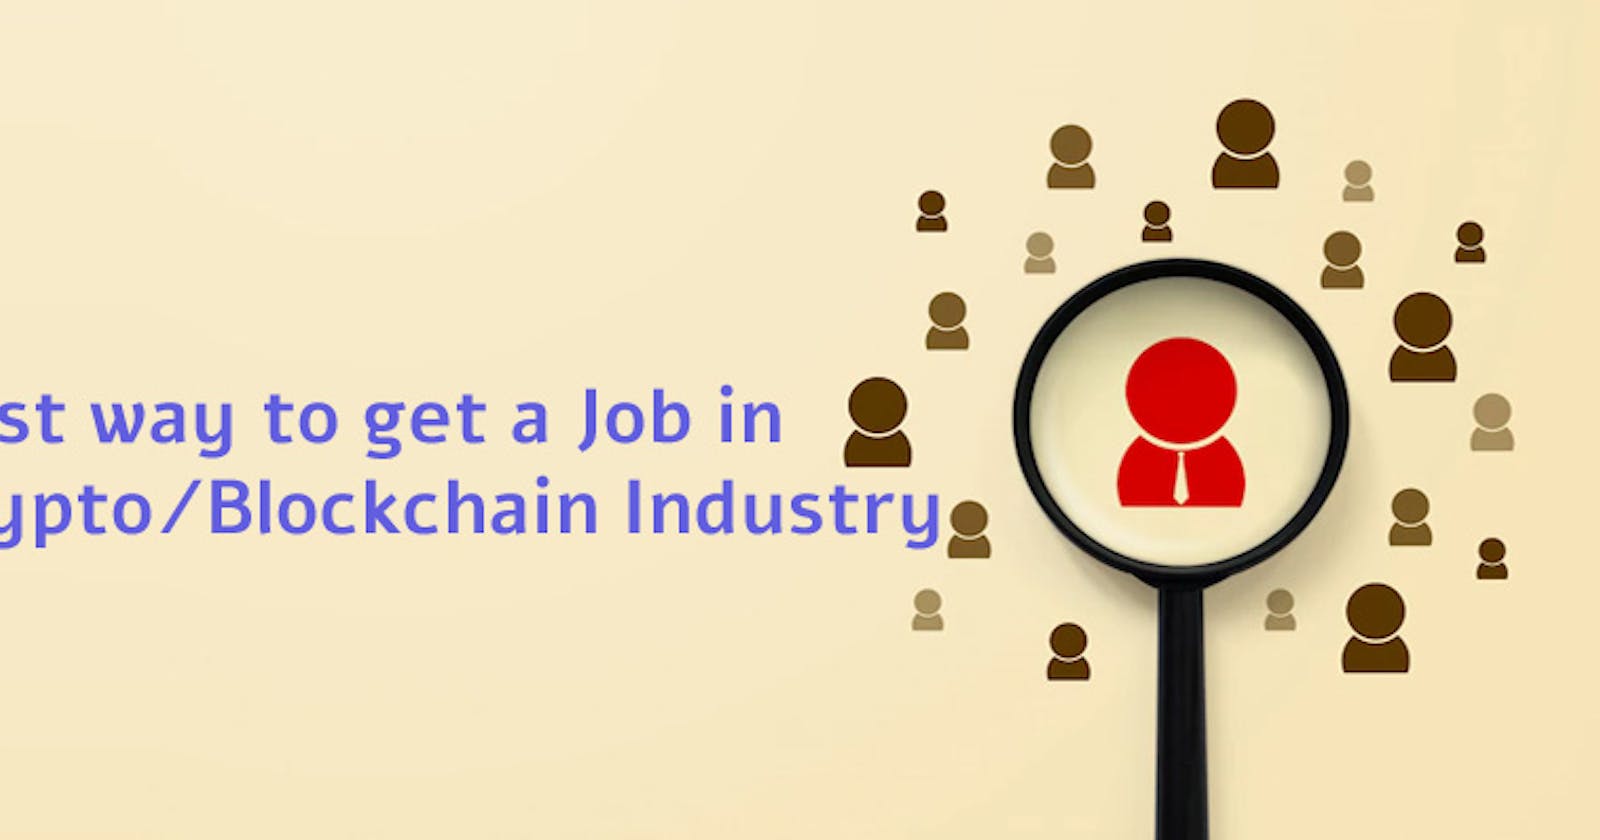 Best way to get a Job in Crypto/Blockchain Industry